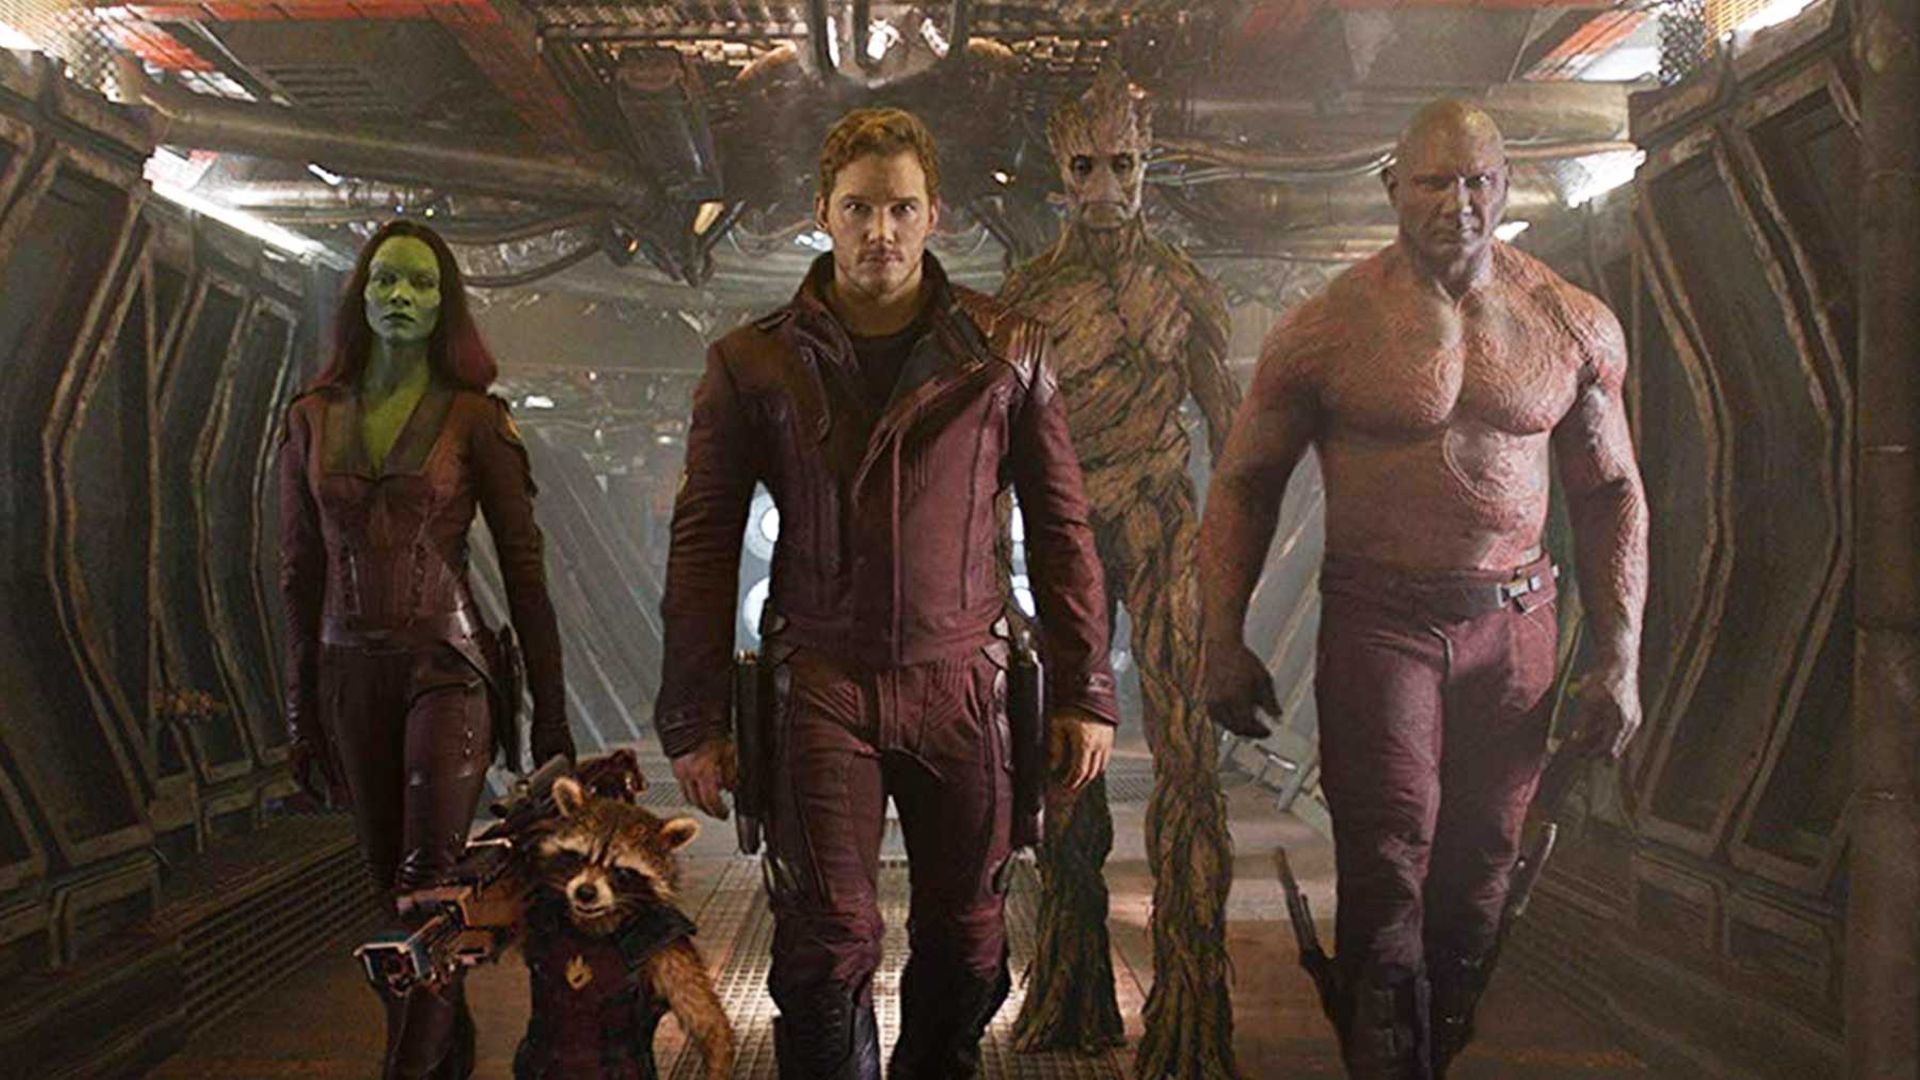 James Gunn pays tribute to cast and crew as Guardians 3 wraps filming